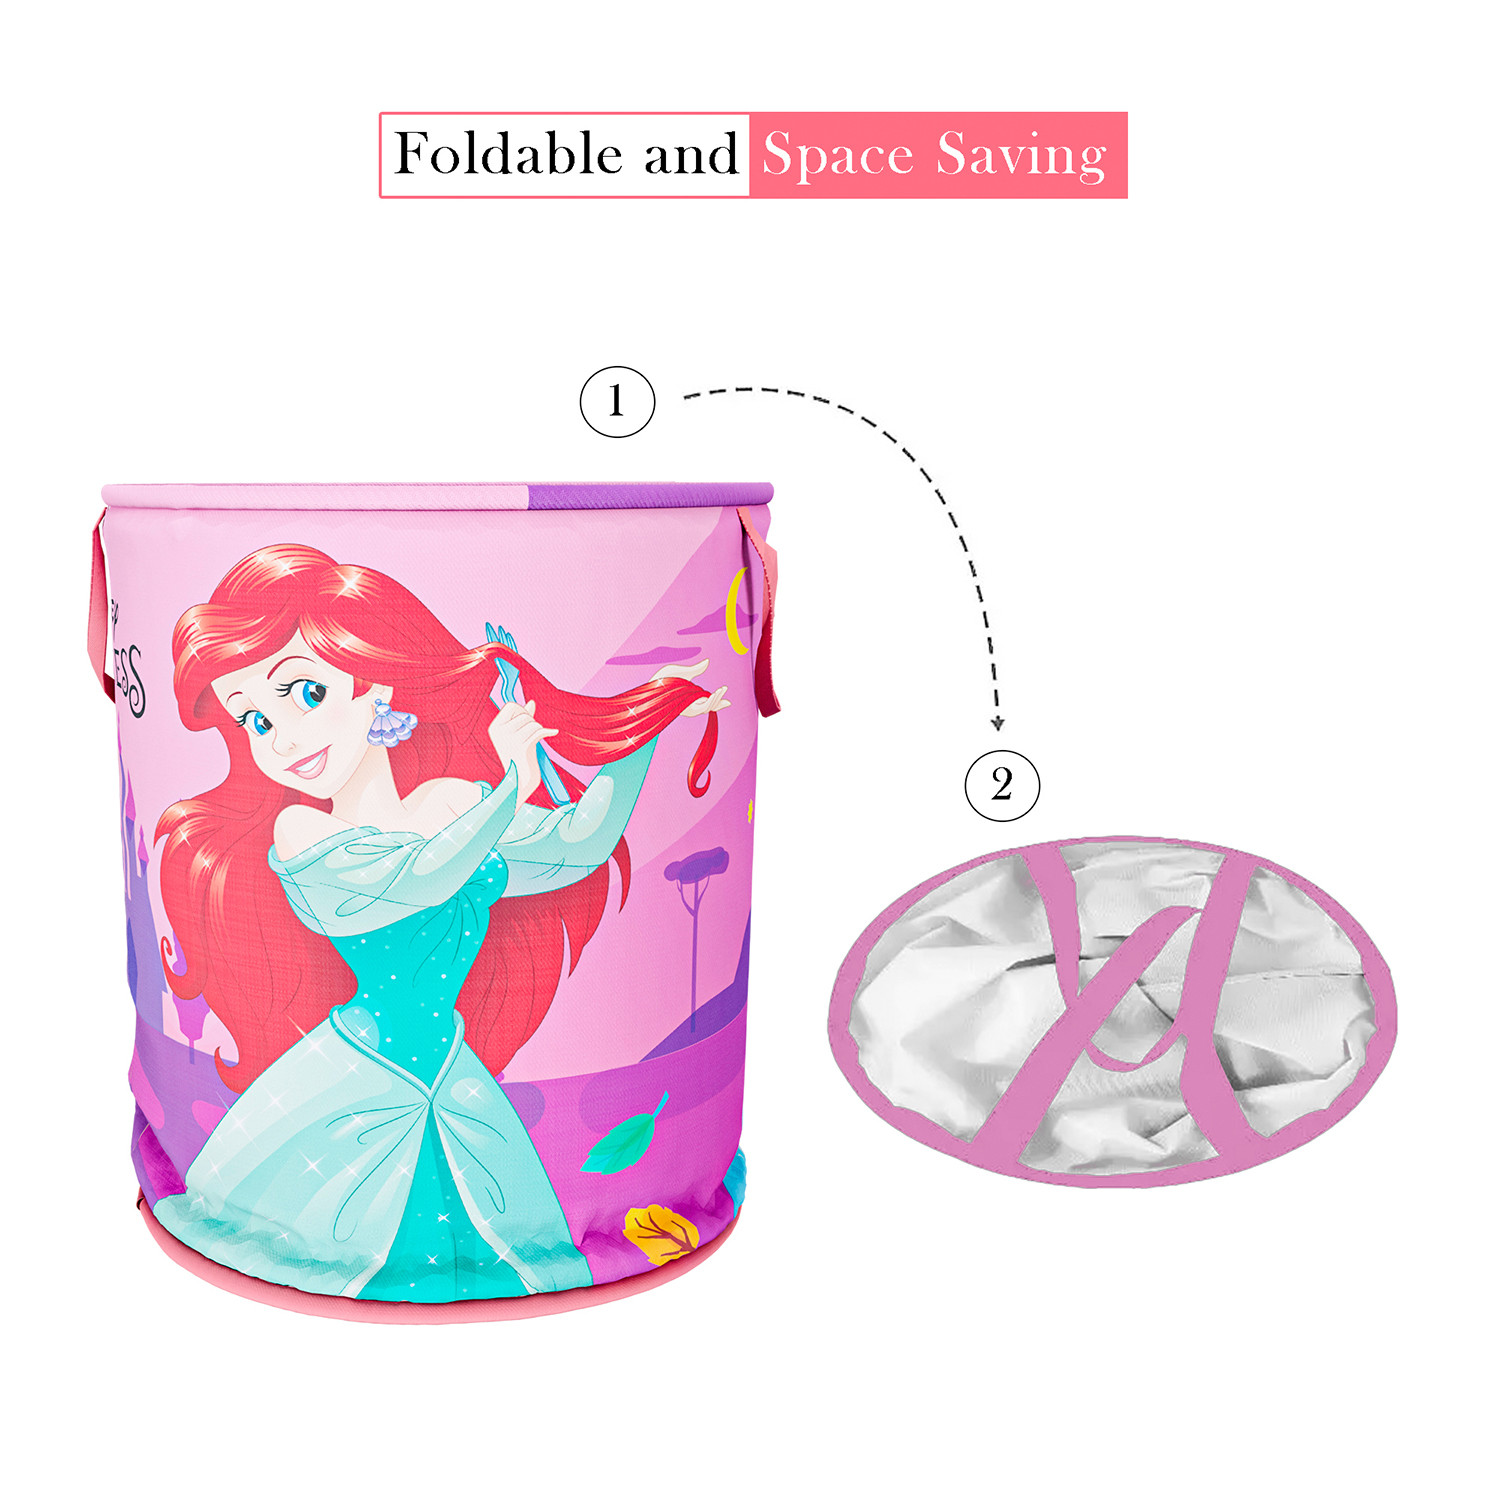 Kuber Industries Disney Princess Print Round Laundry Basket|Polyester Clothes Hamper|Waterproof & Foldable Round Laundry Bag with Handle,45 Ltr.(Pink)